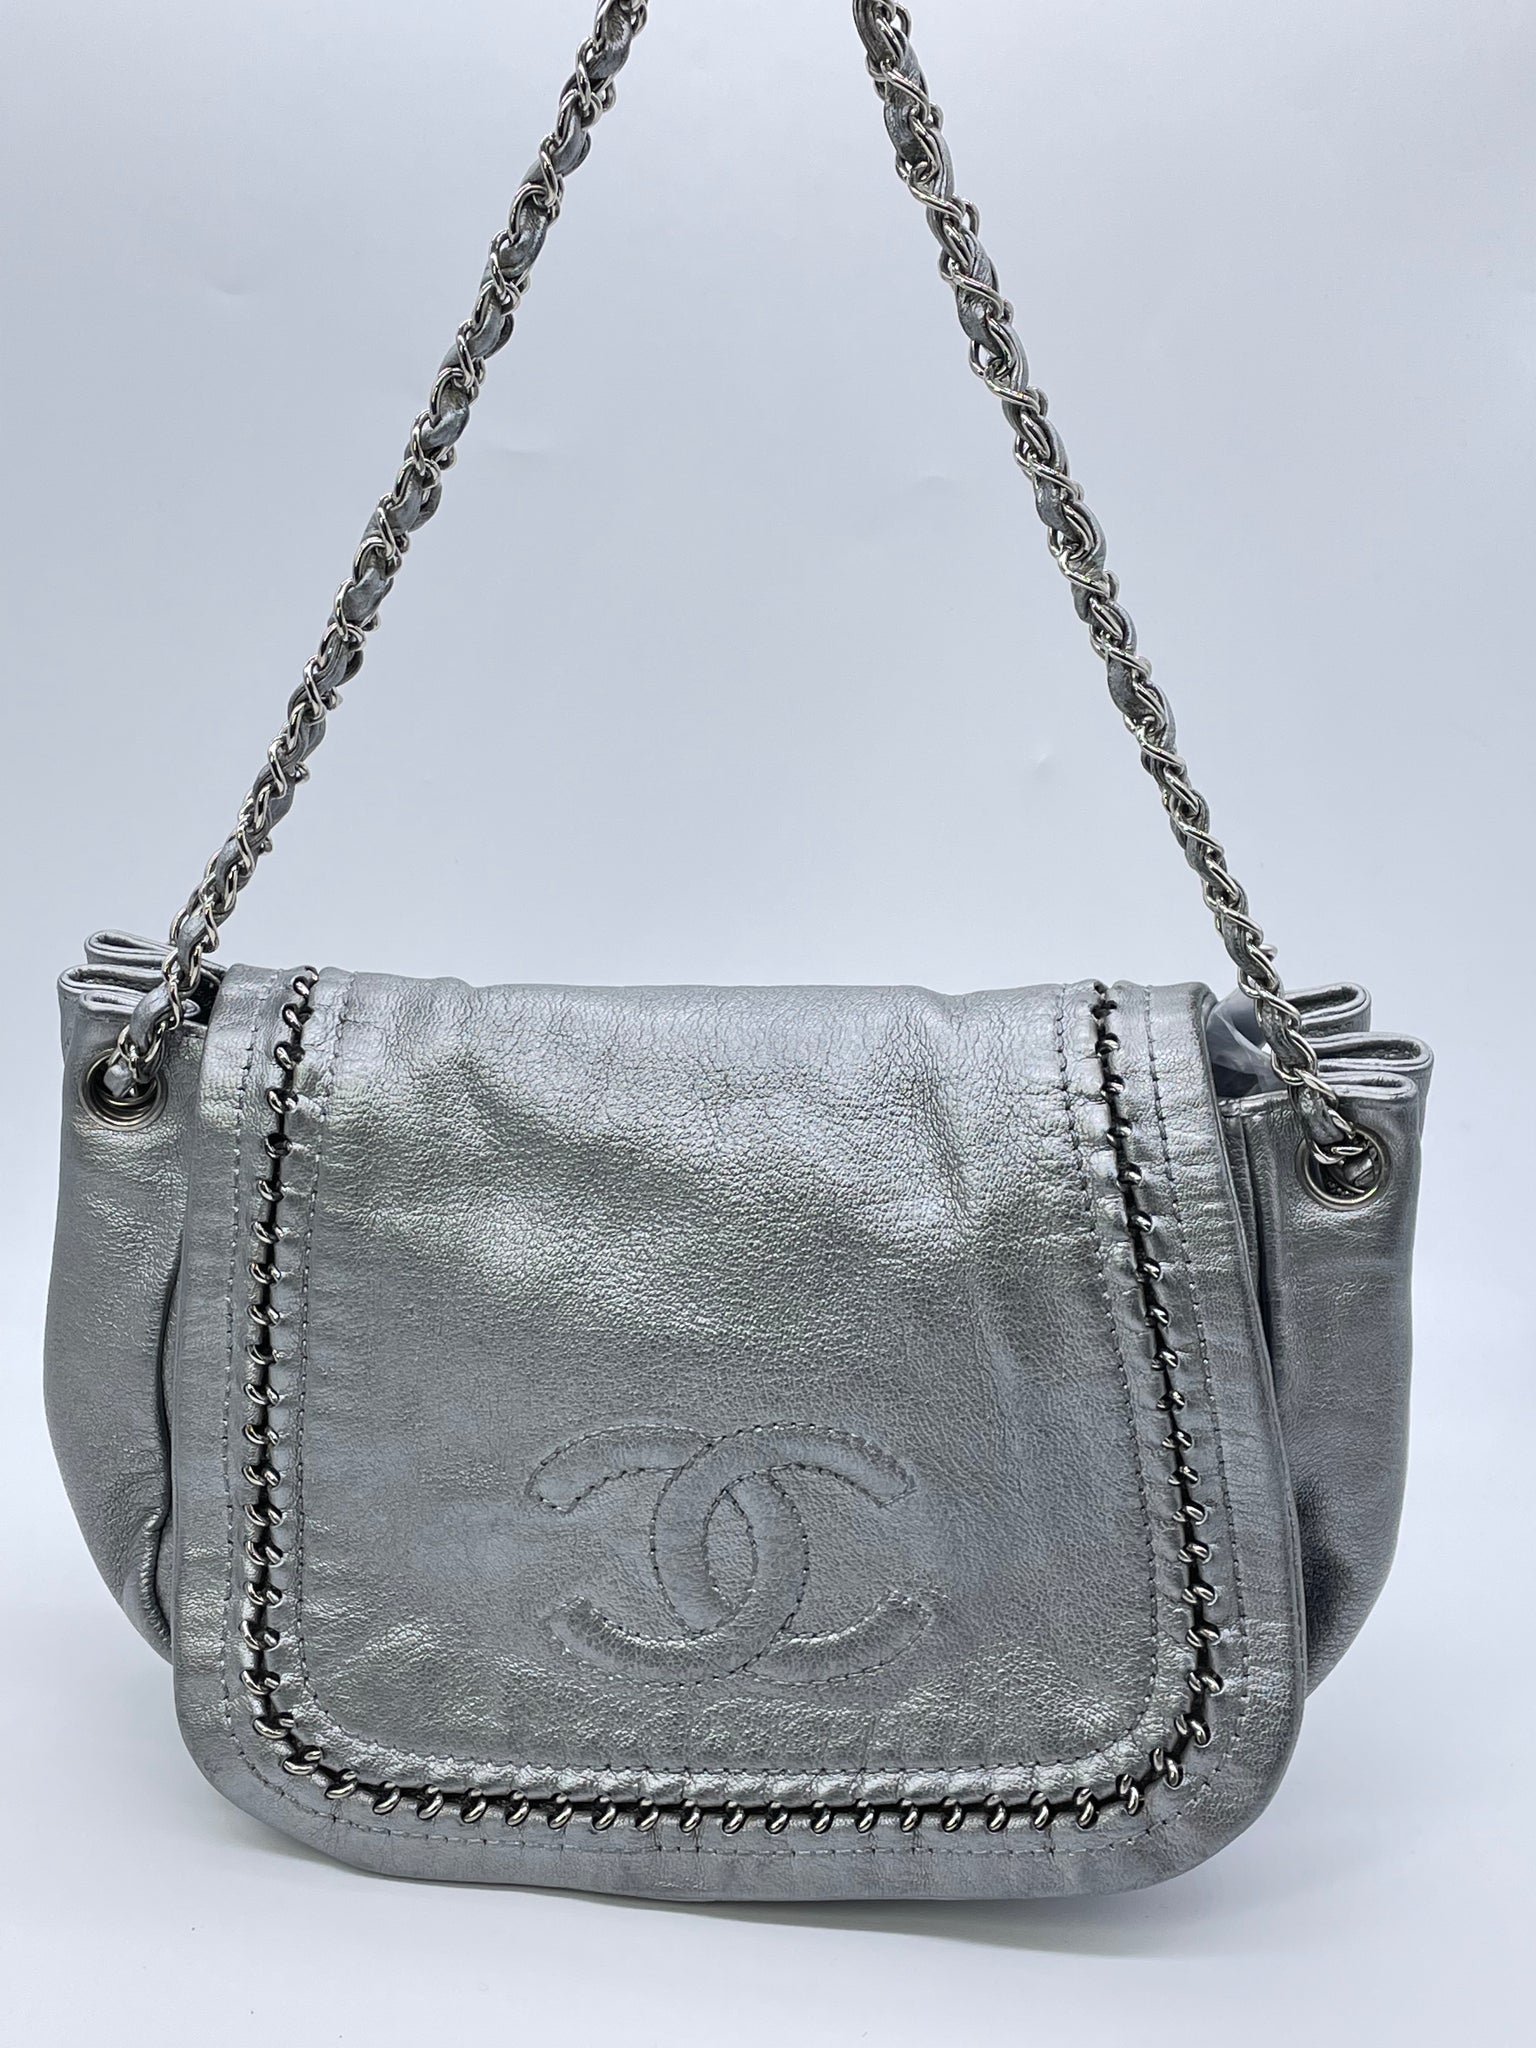 Chanel Silver Leather Luxe Ligne Accordion Flap Bag Chanel